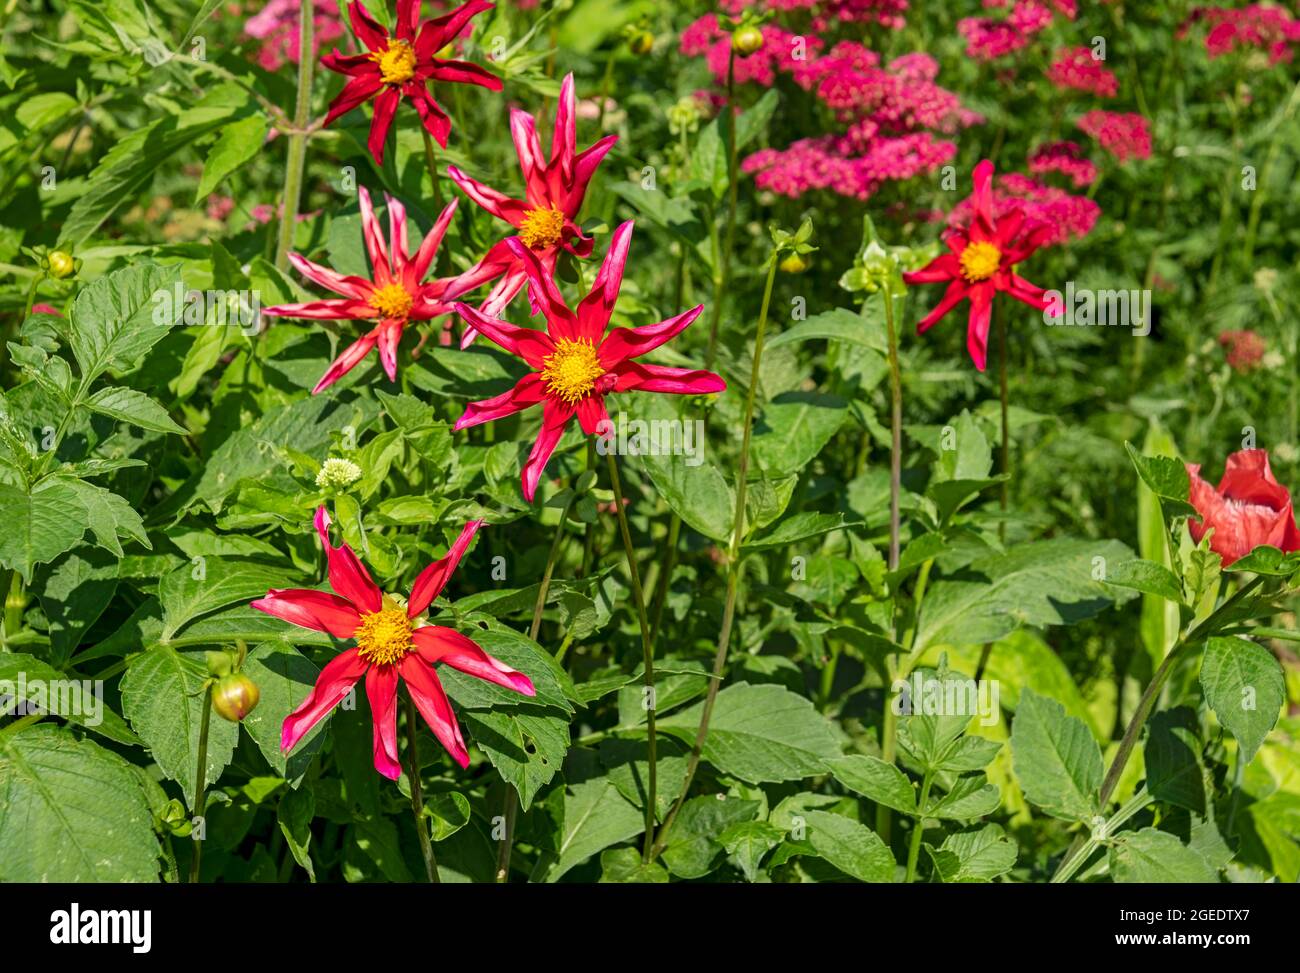 Close up of red star dahlia dahlias plants growing flowers flowering in a garden border in summer England UK United Kingdom GB Great Britain Stock Photo